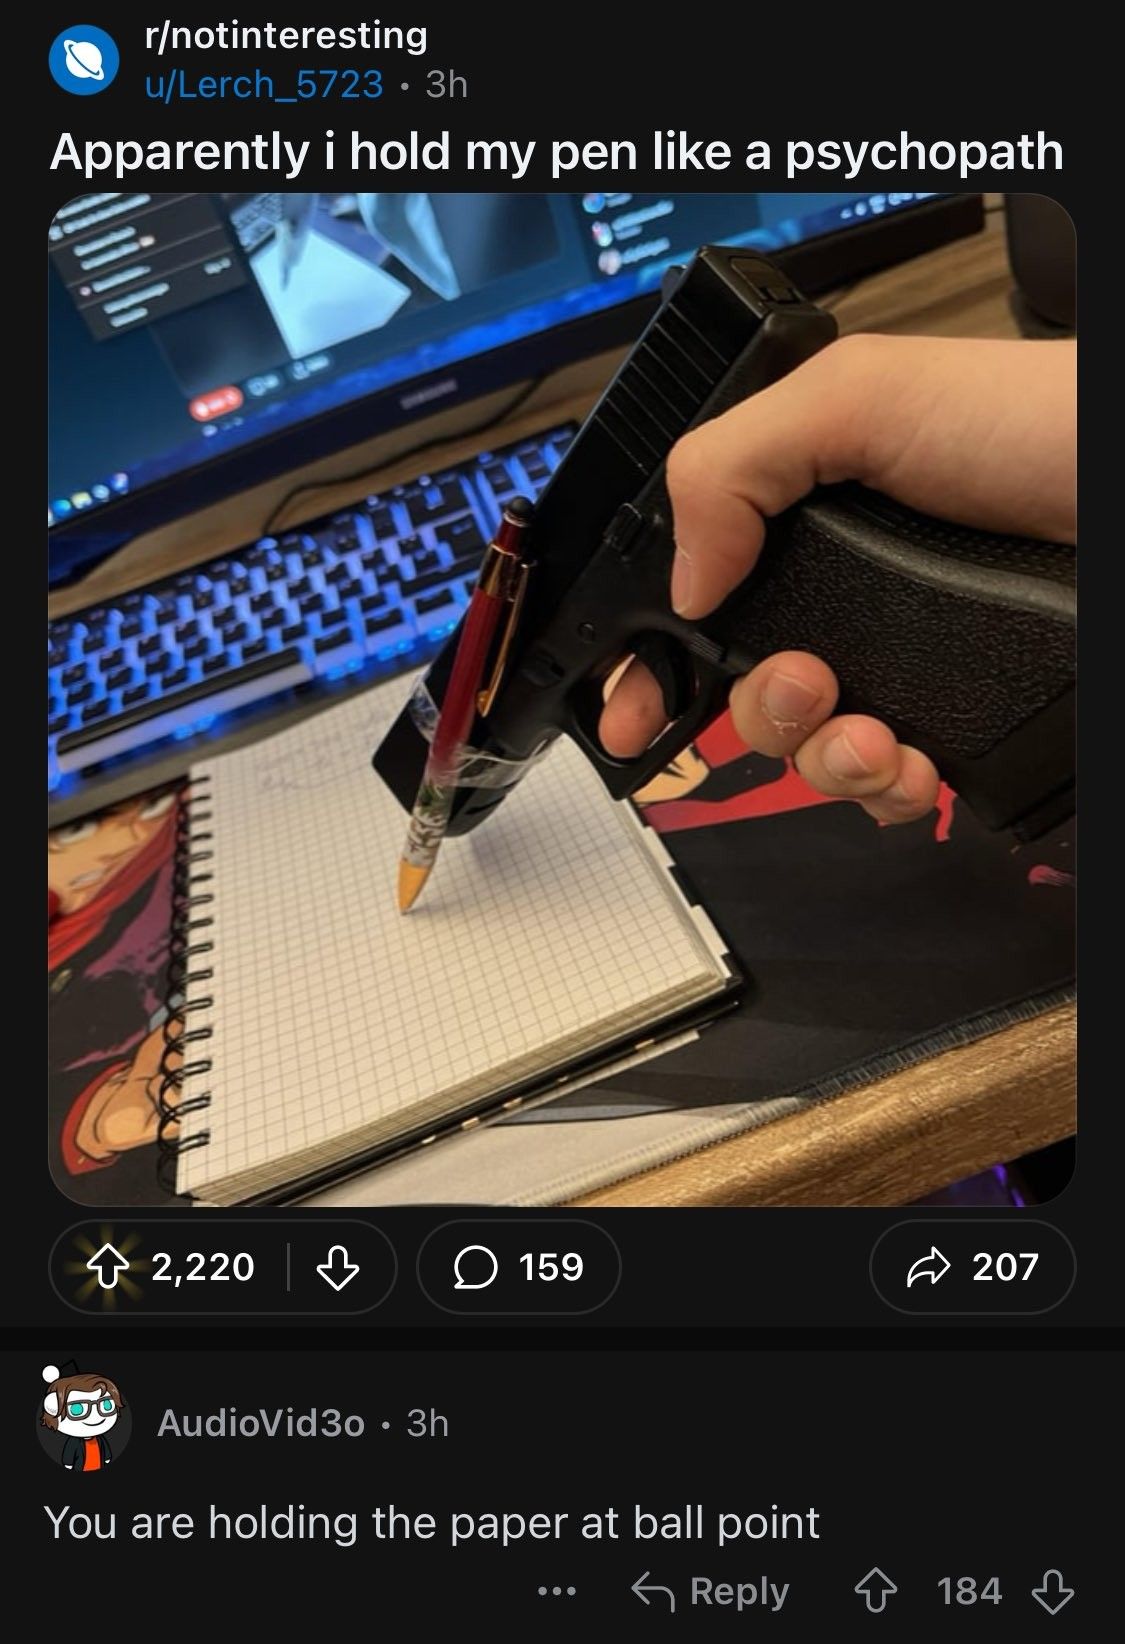 He only taped the pen at one point, clearly a maniac